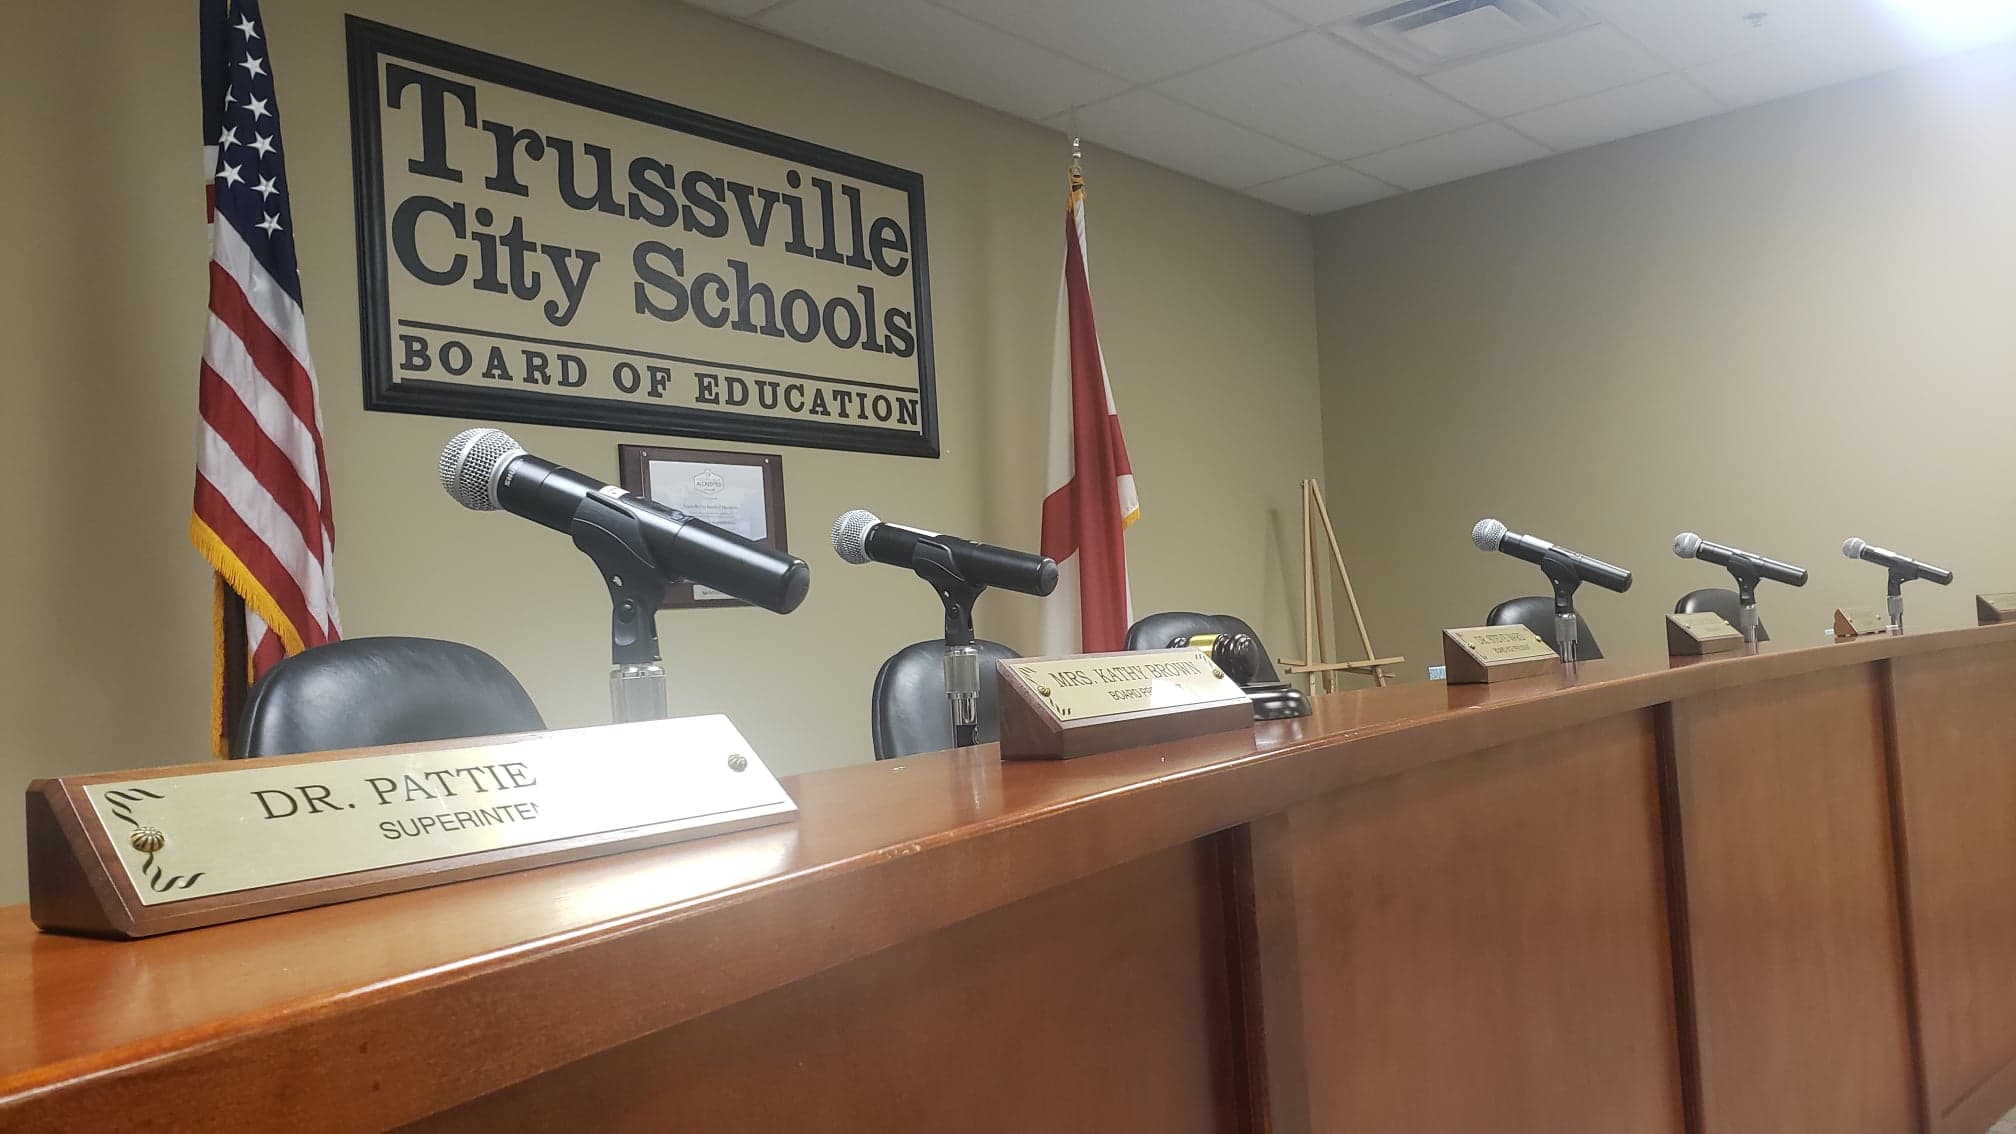 Trussville's Board of Education selection process for new member nearing completion